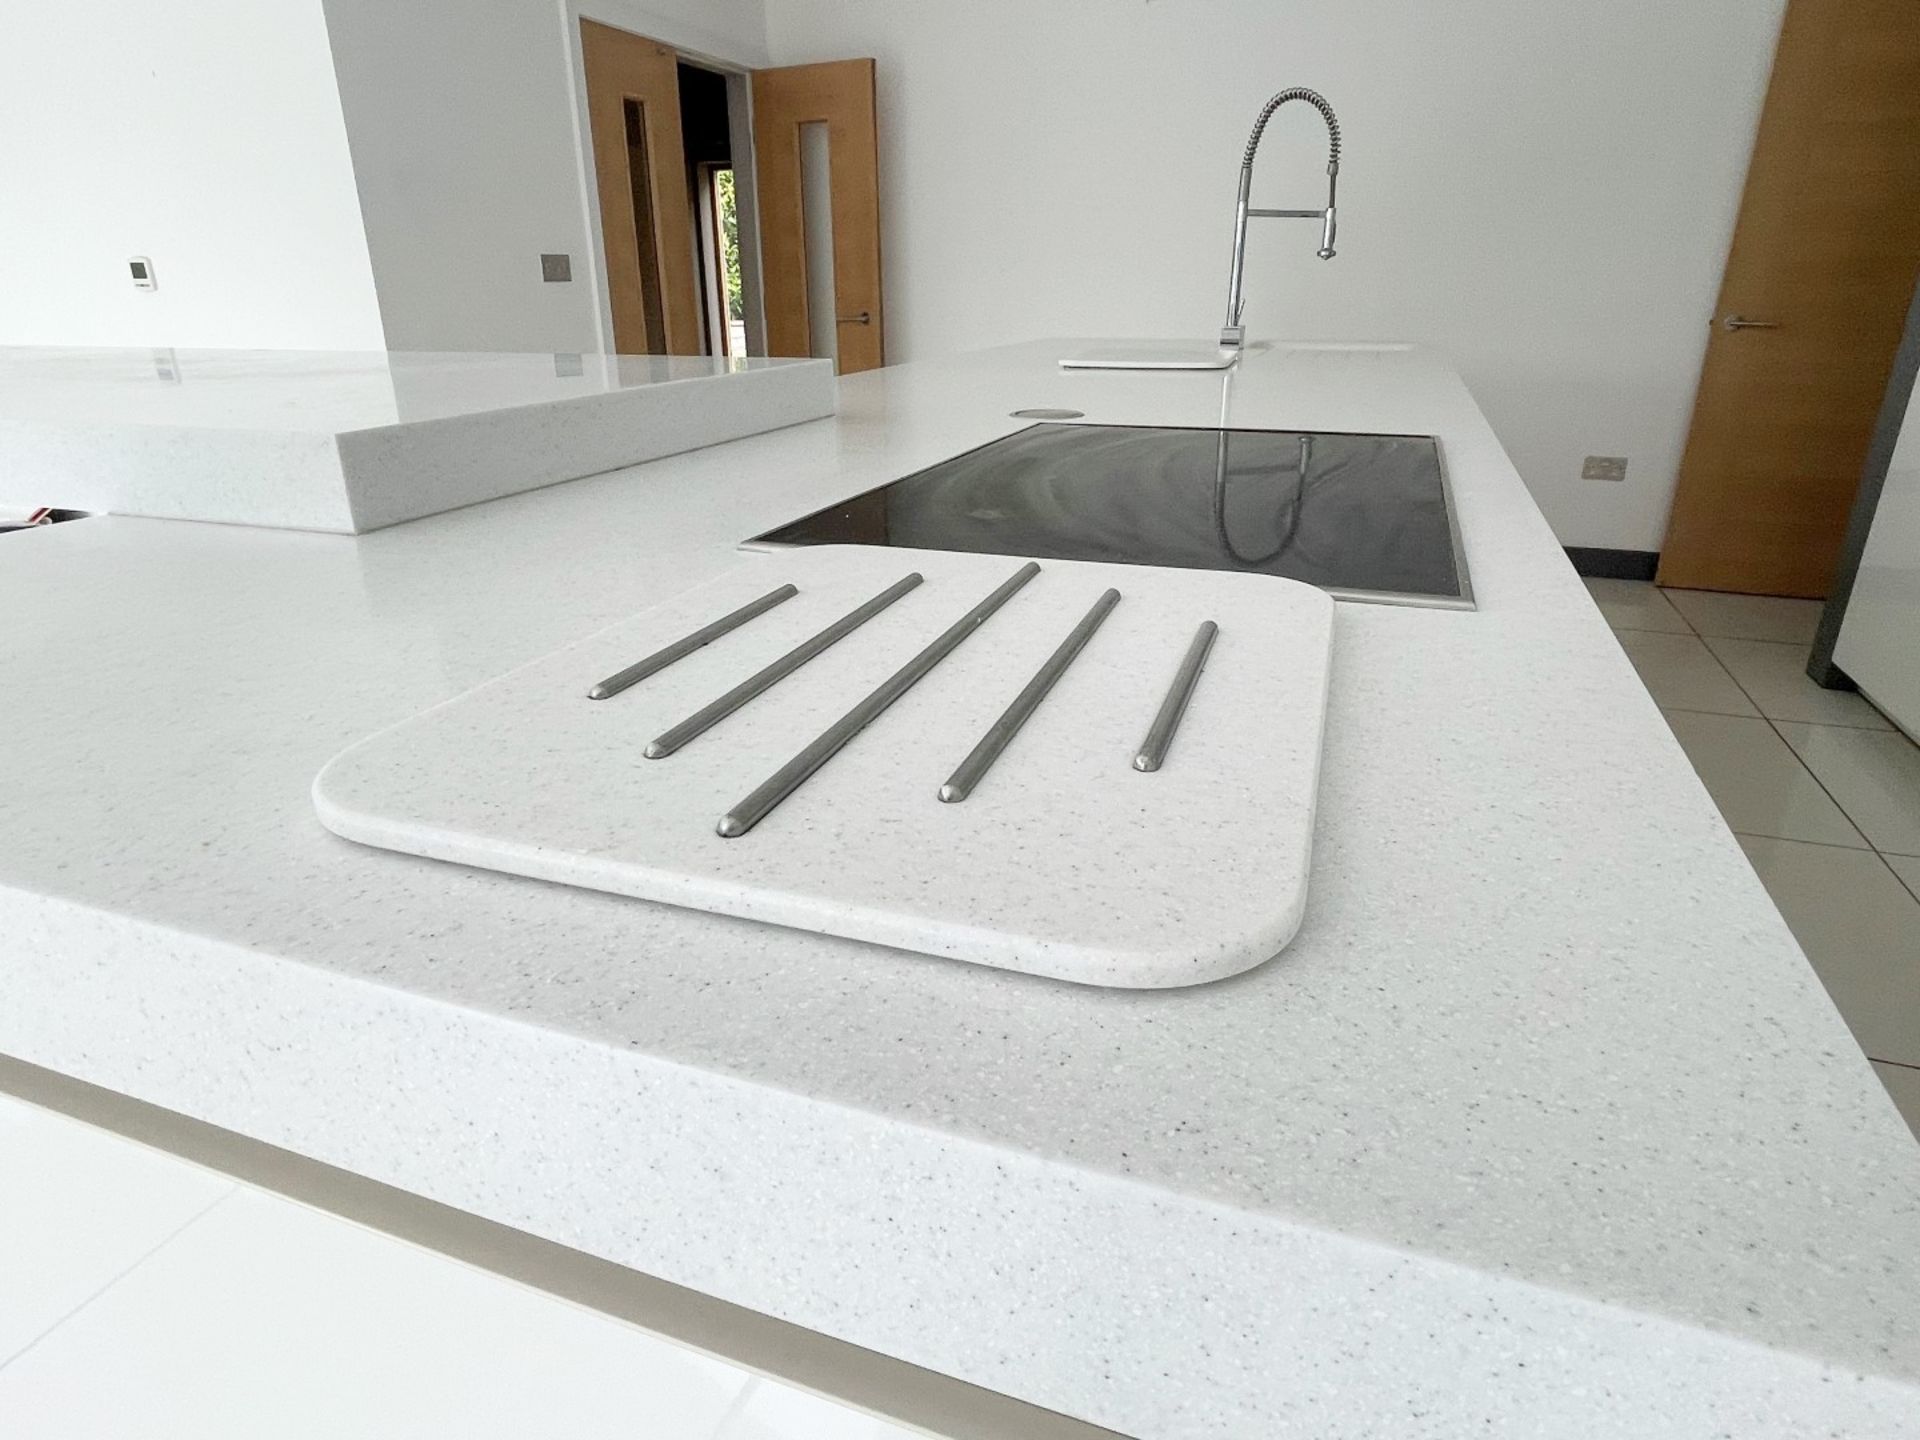 1 x SieMatic Contemporary Fitted Kitchen With Branded Appliances, Central Island + Corian Worktops - Image 44 of 100